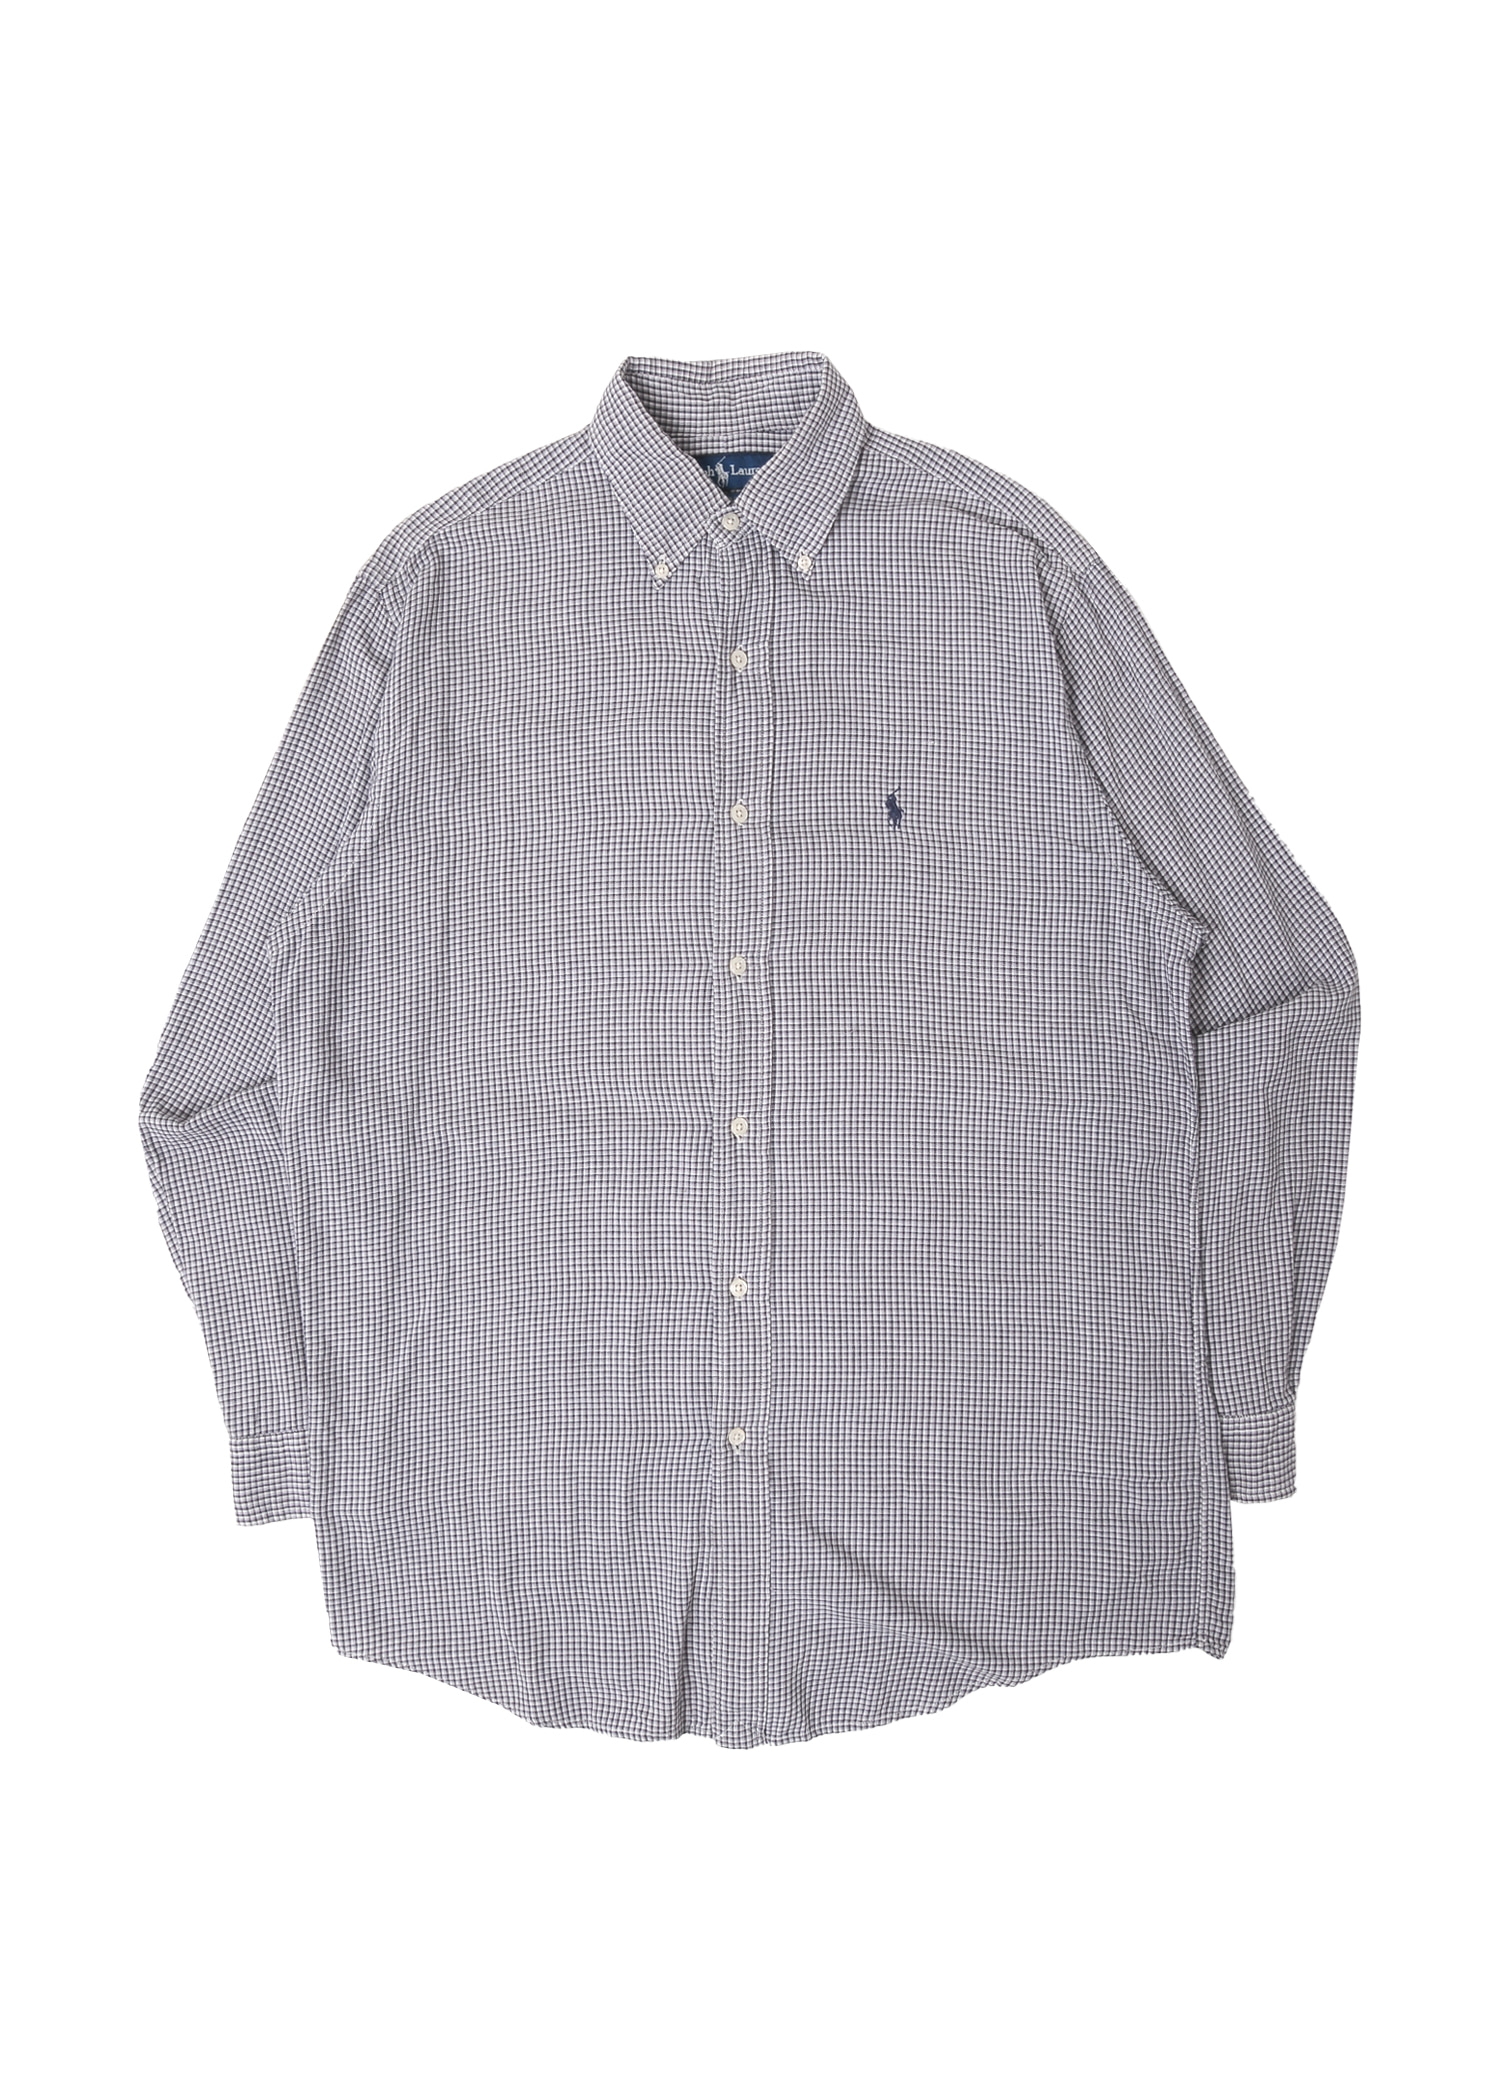 Polo by Ralph Lauren check shirts